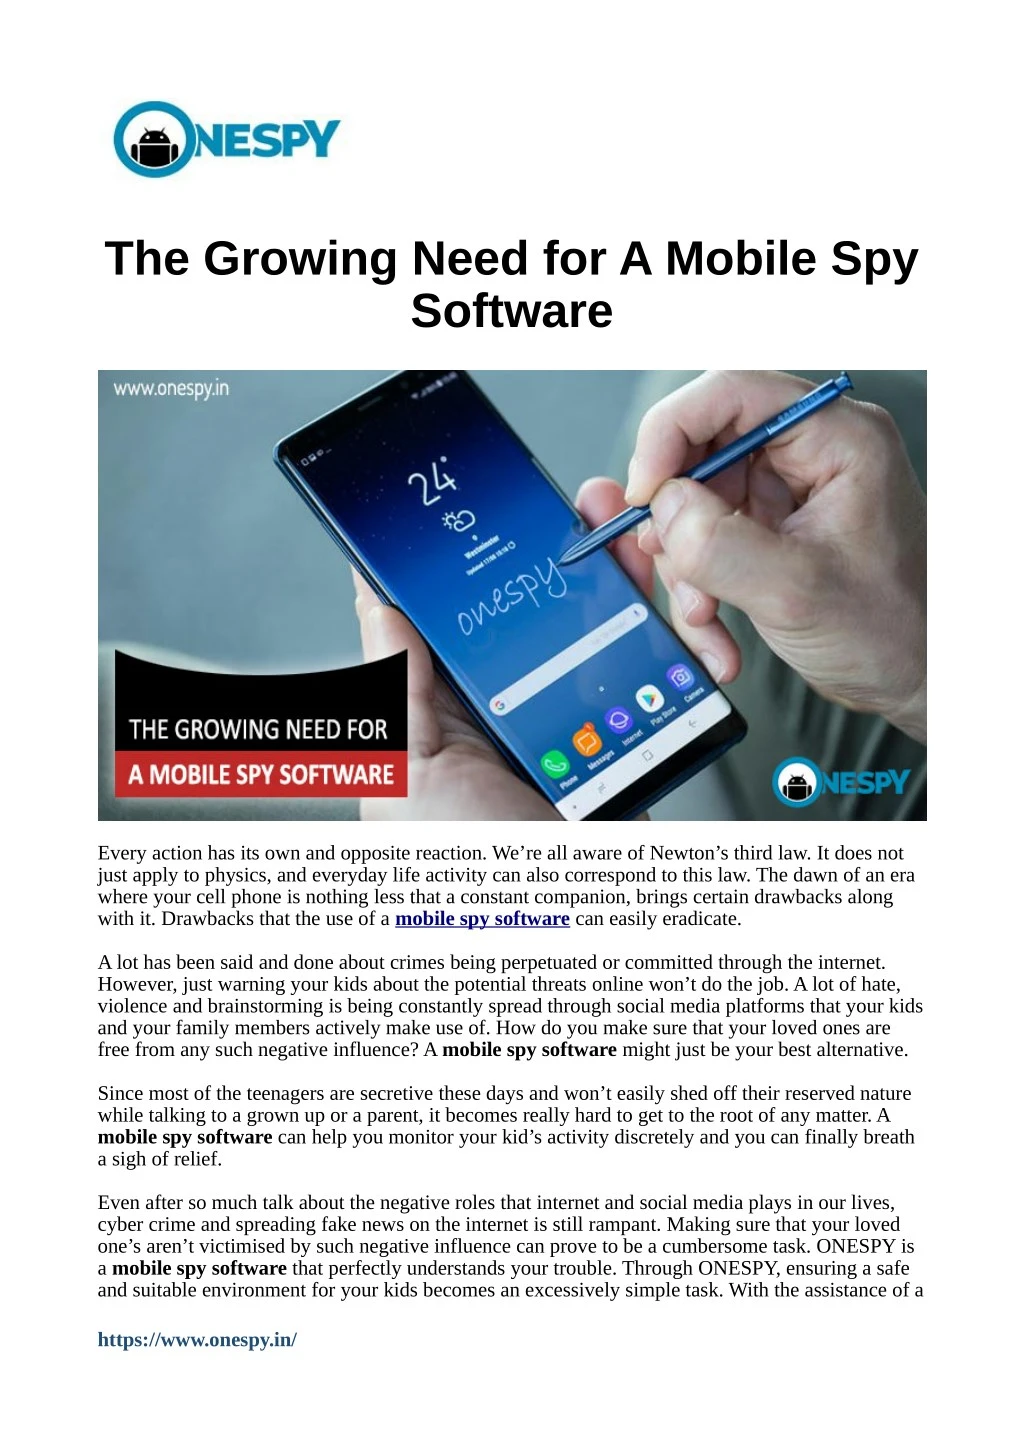 the growing need for a mobile spy software